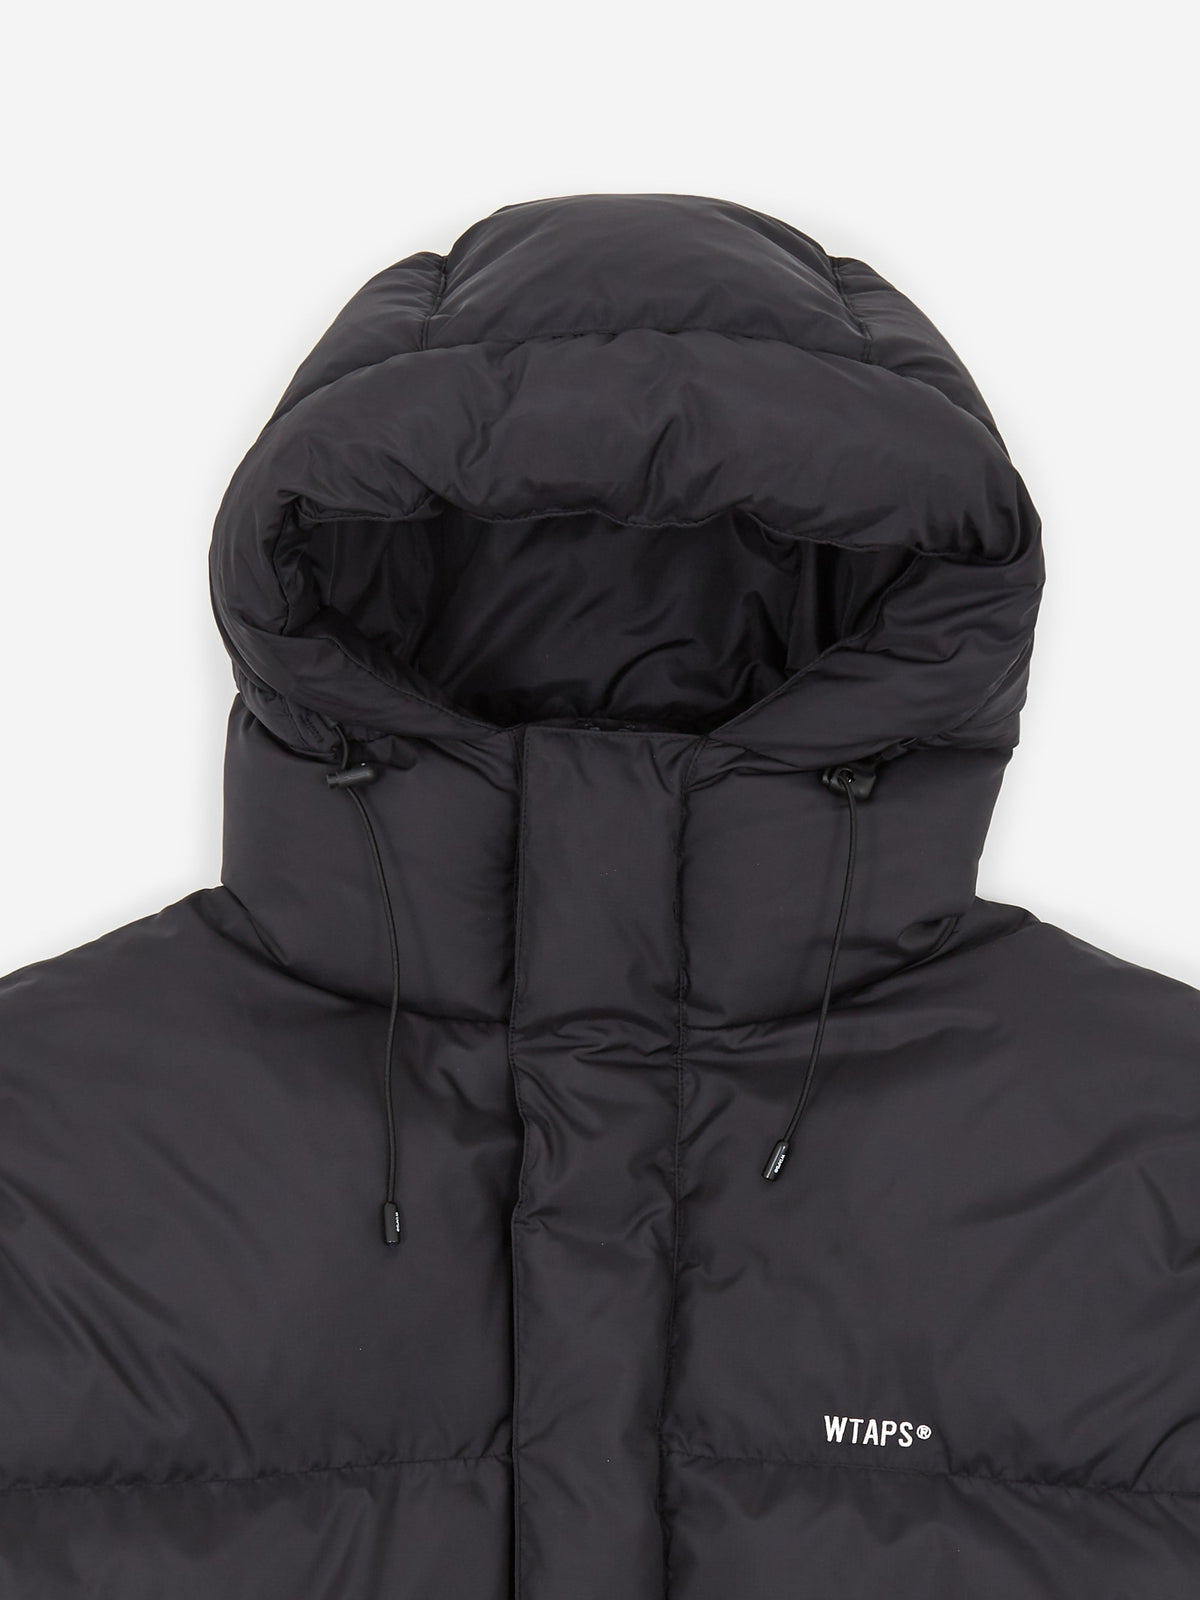 We have a wide range of WTAPS Torpor / Jacket - Black 0 on our